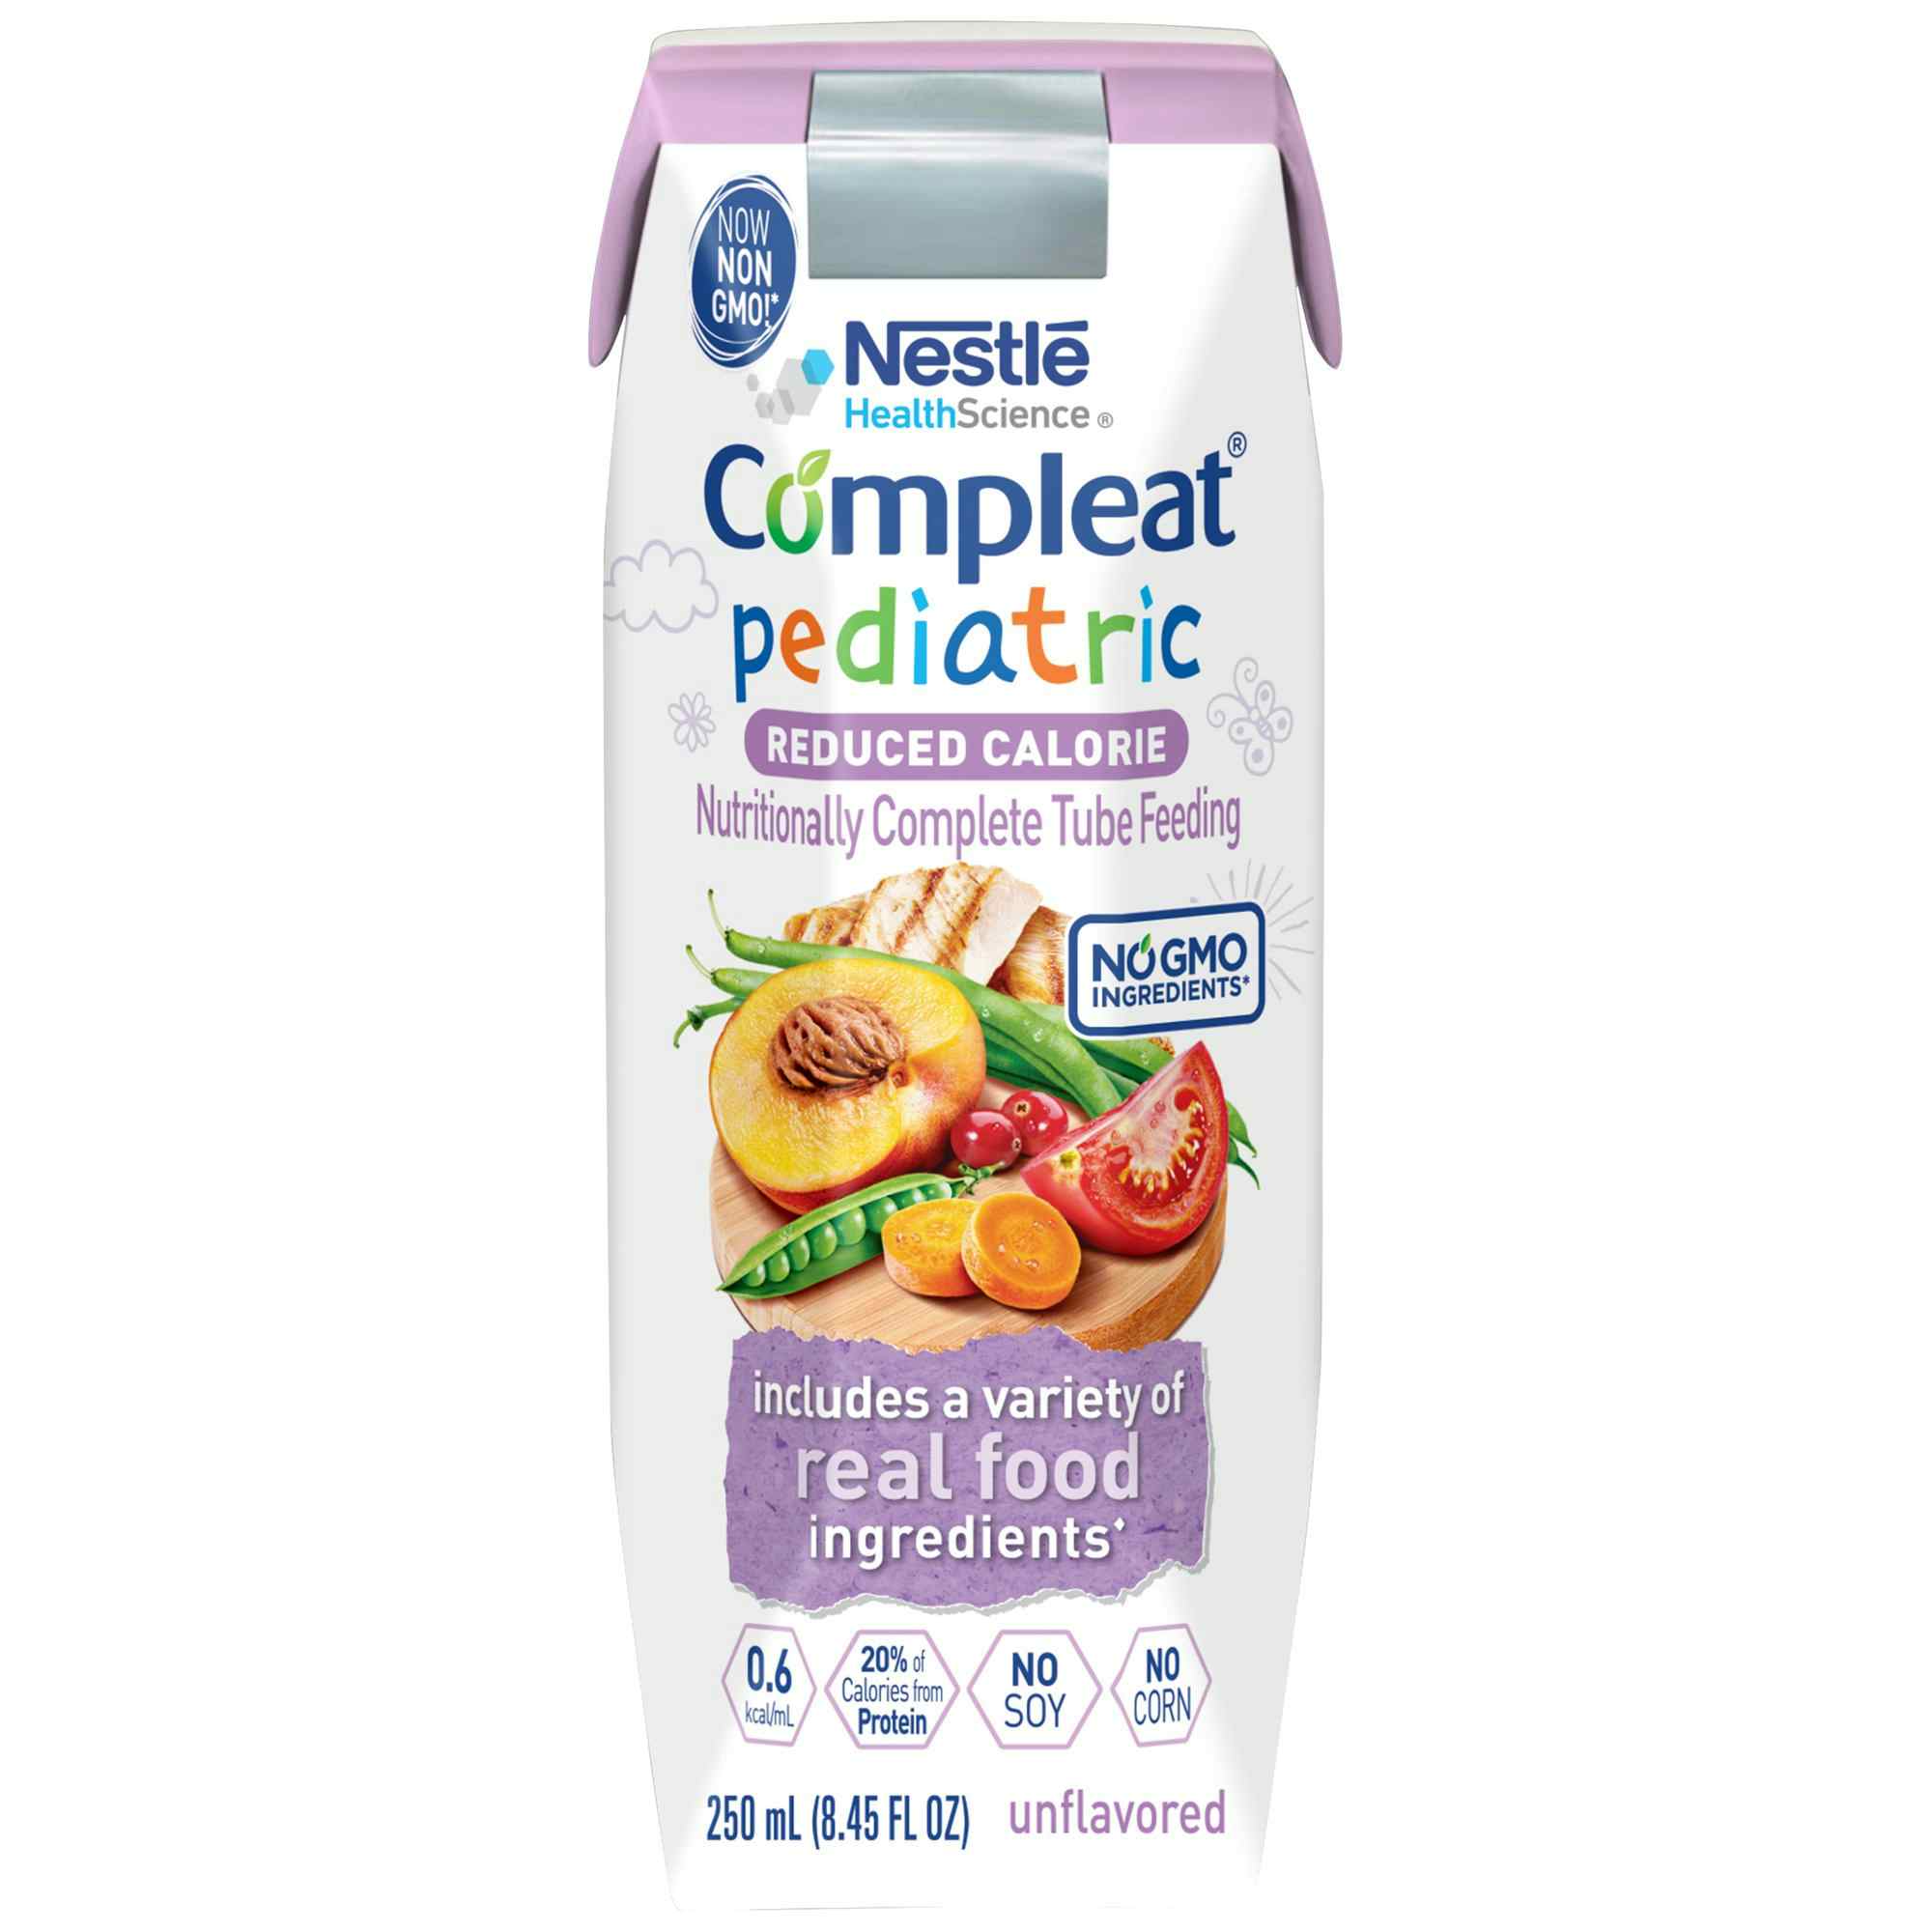 Compleat Pediatric Reduced Calorie Nutritionally Complete Tube Feeding Formula, 8.45 oz., 10043900380749, Case of 24